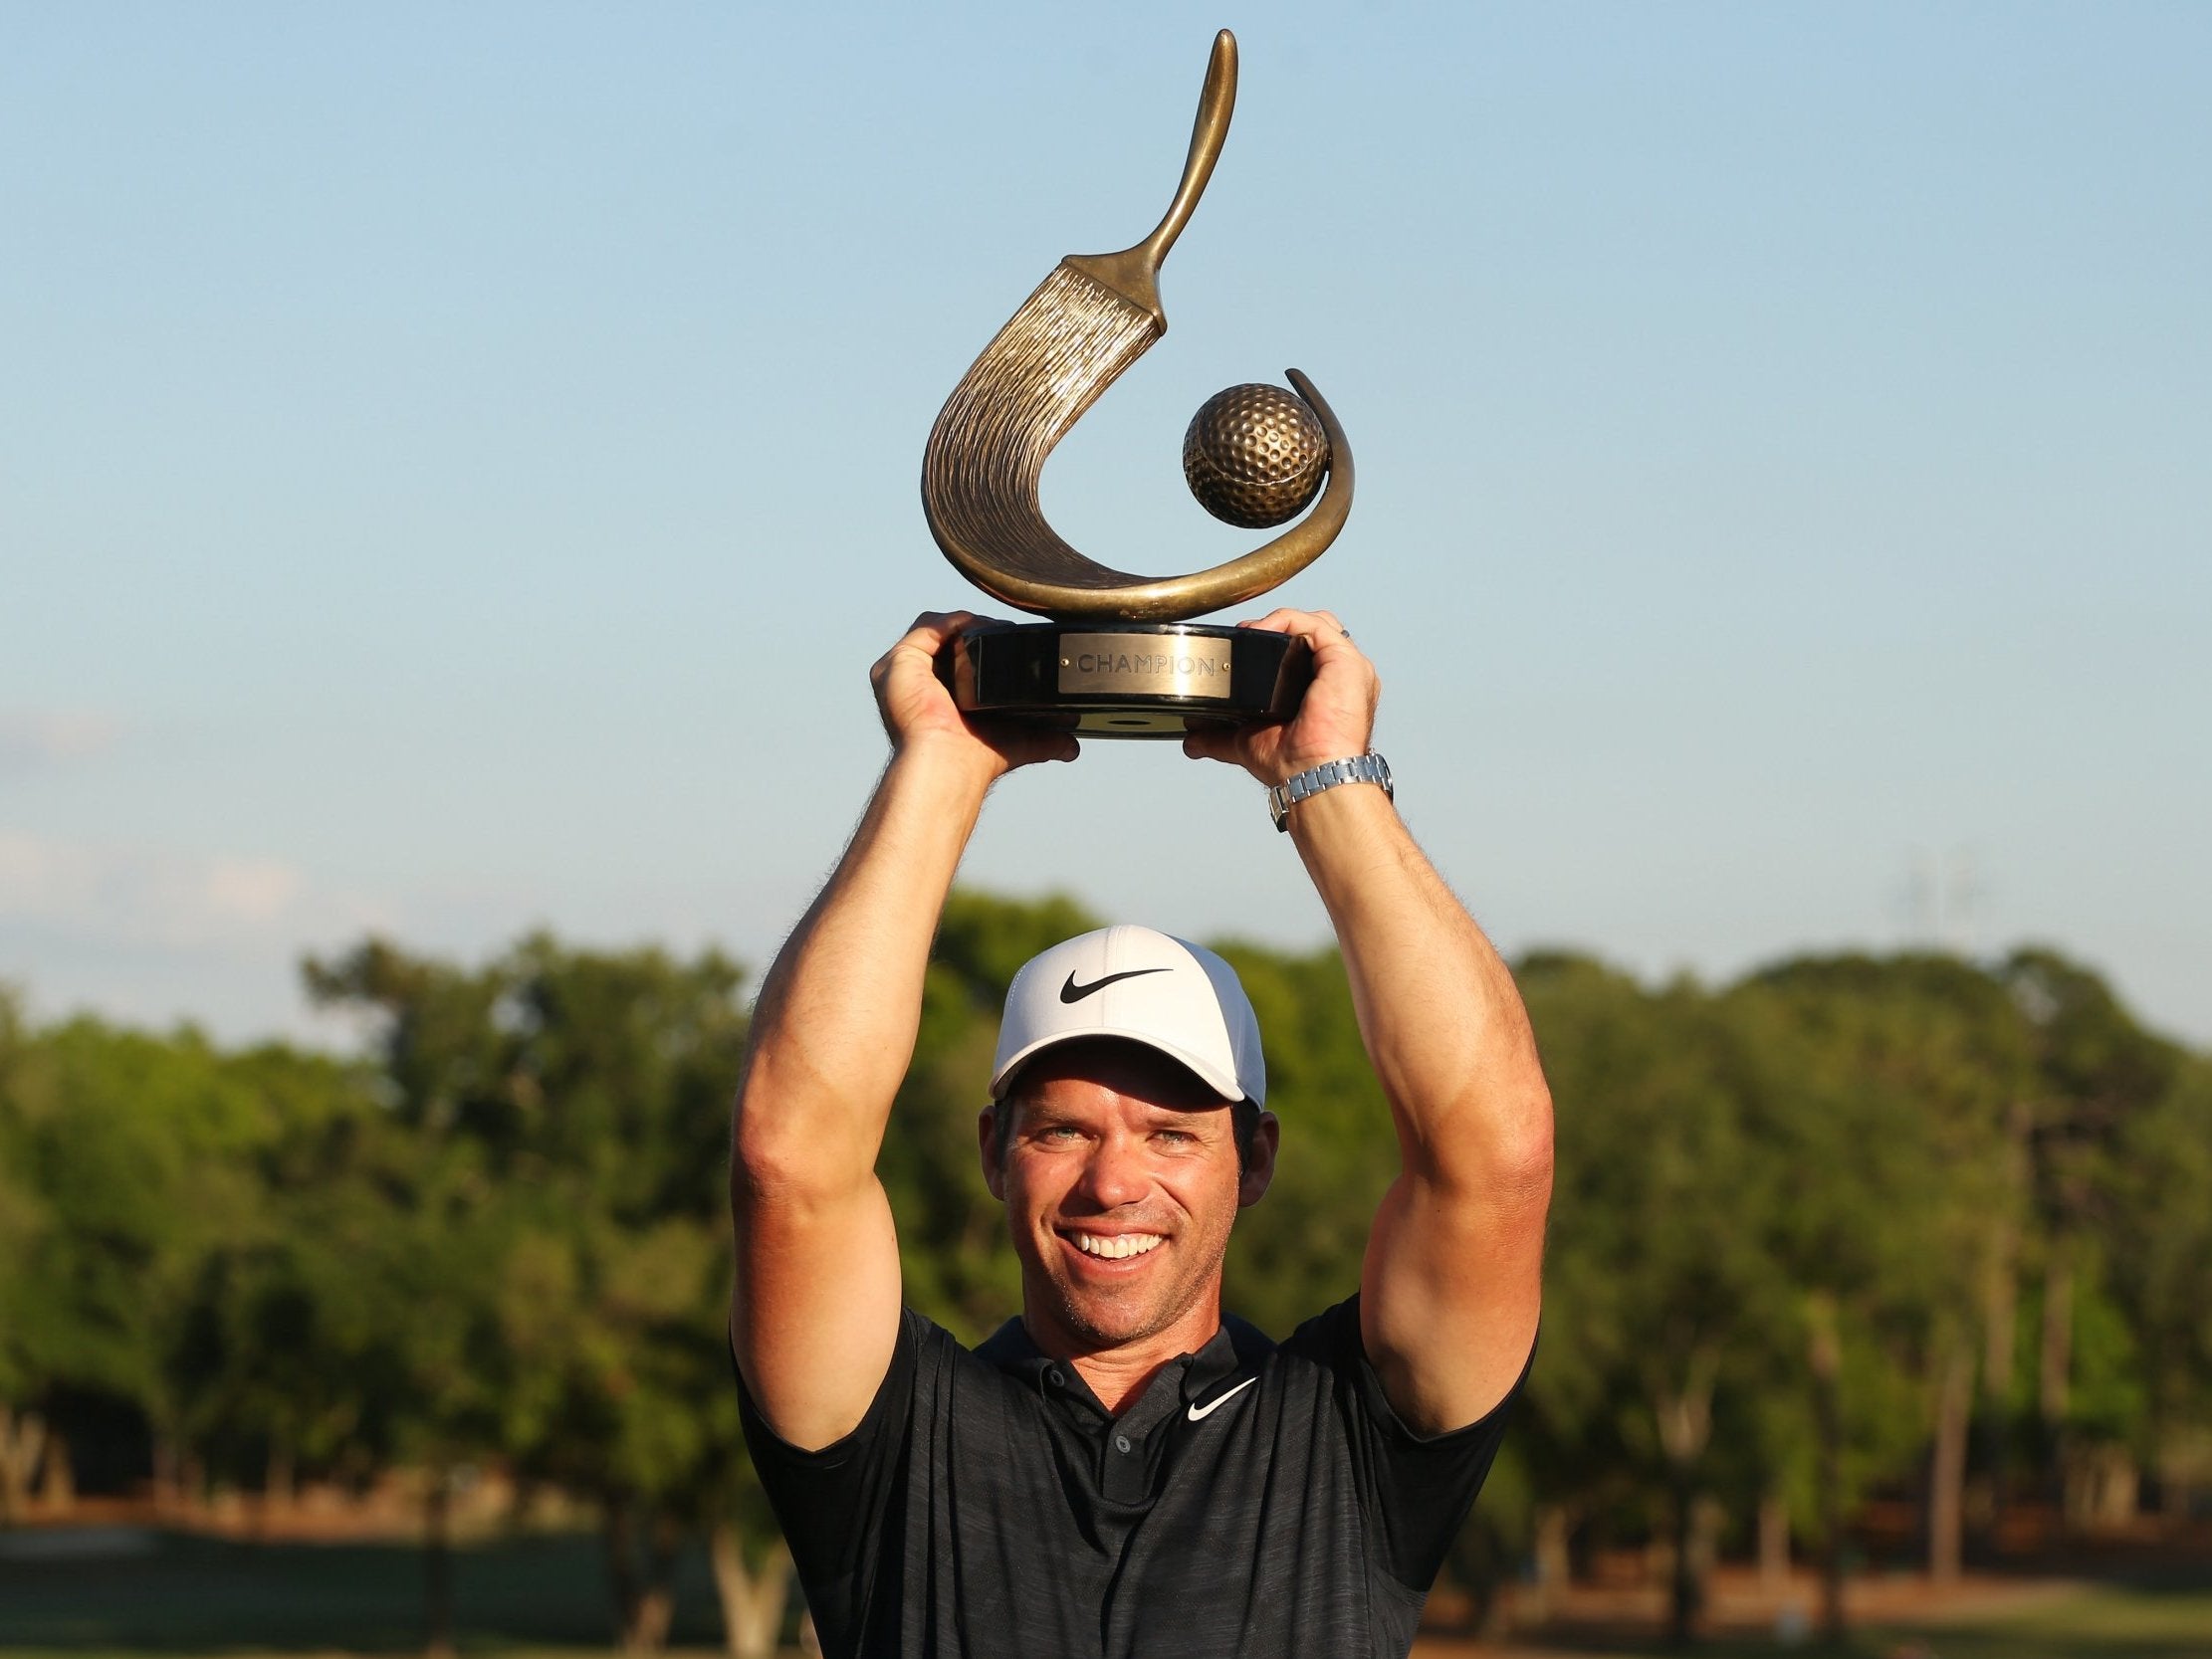 Paul Casey celebrates winning the Valspar Championship for the second consecutive year